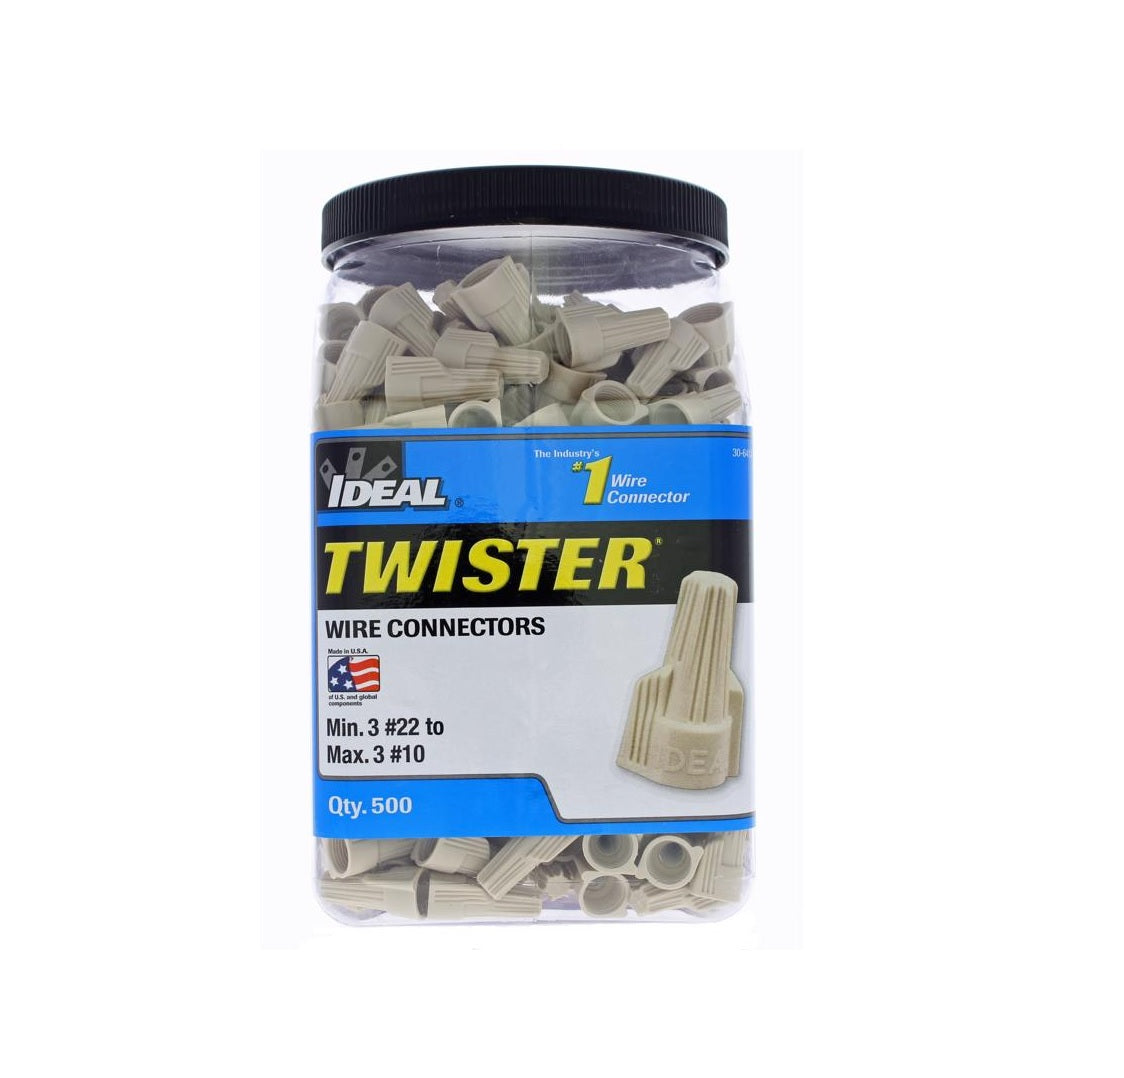 Ideal 30-641J Twister Wire Connectors, Tan